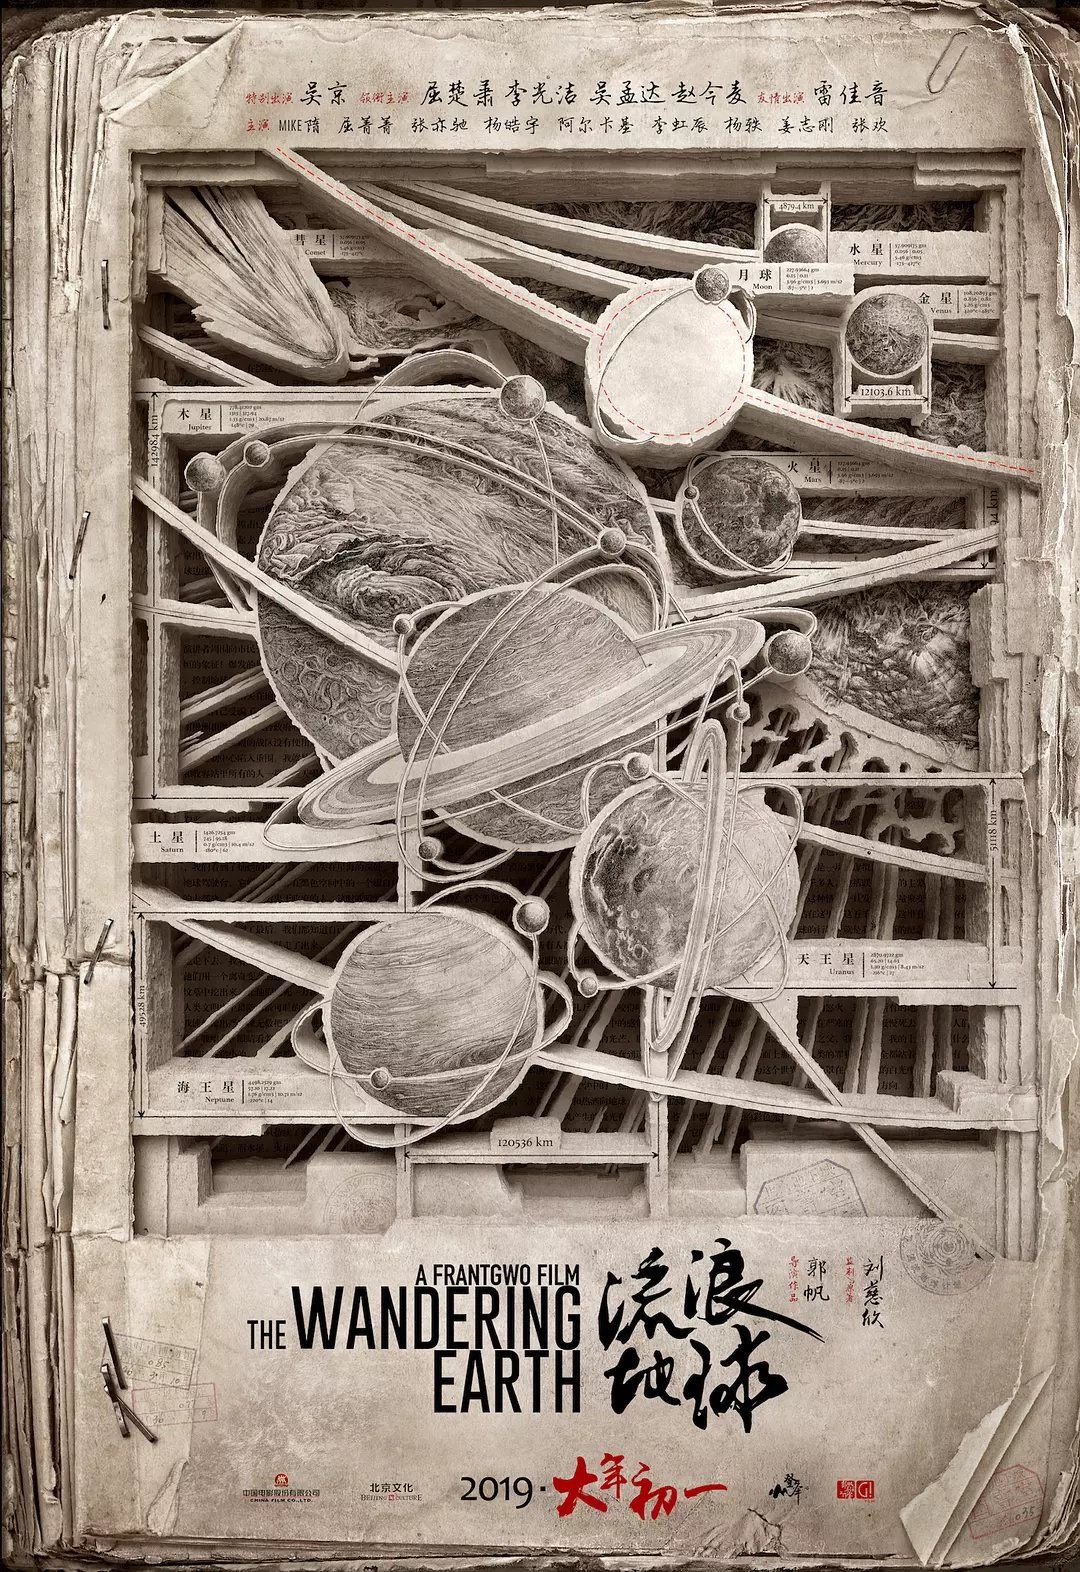 Poster For The Wandering Earth An Upcoming Chinese Sci Fi Film Based On A Story By Liu Cixin The Author Of The Famo. Earth Movie, Earth Poster, Best Movie Posters